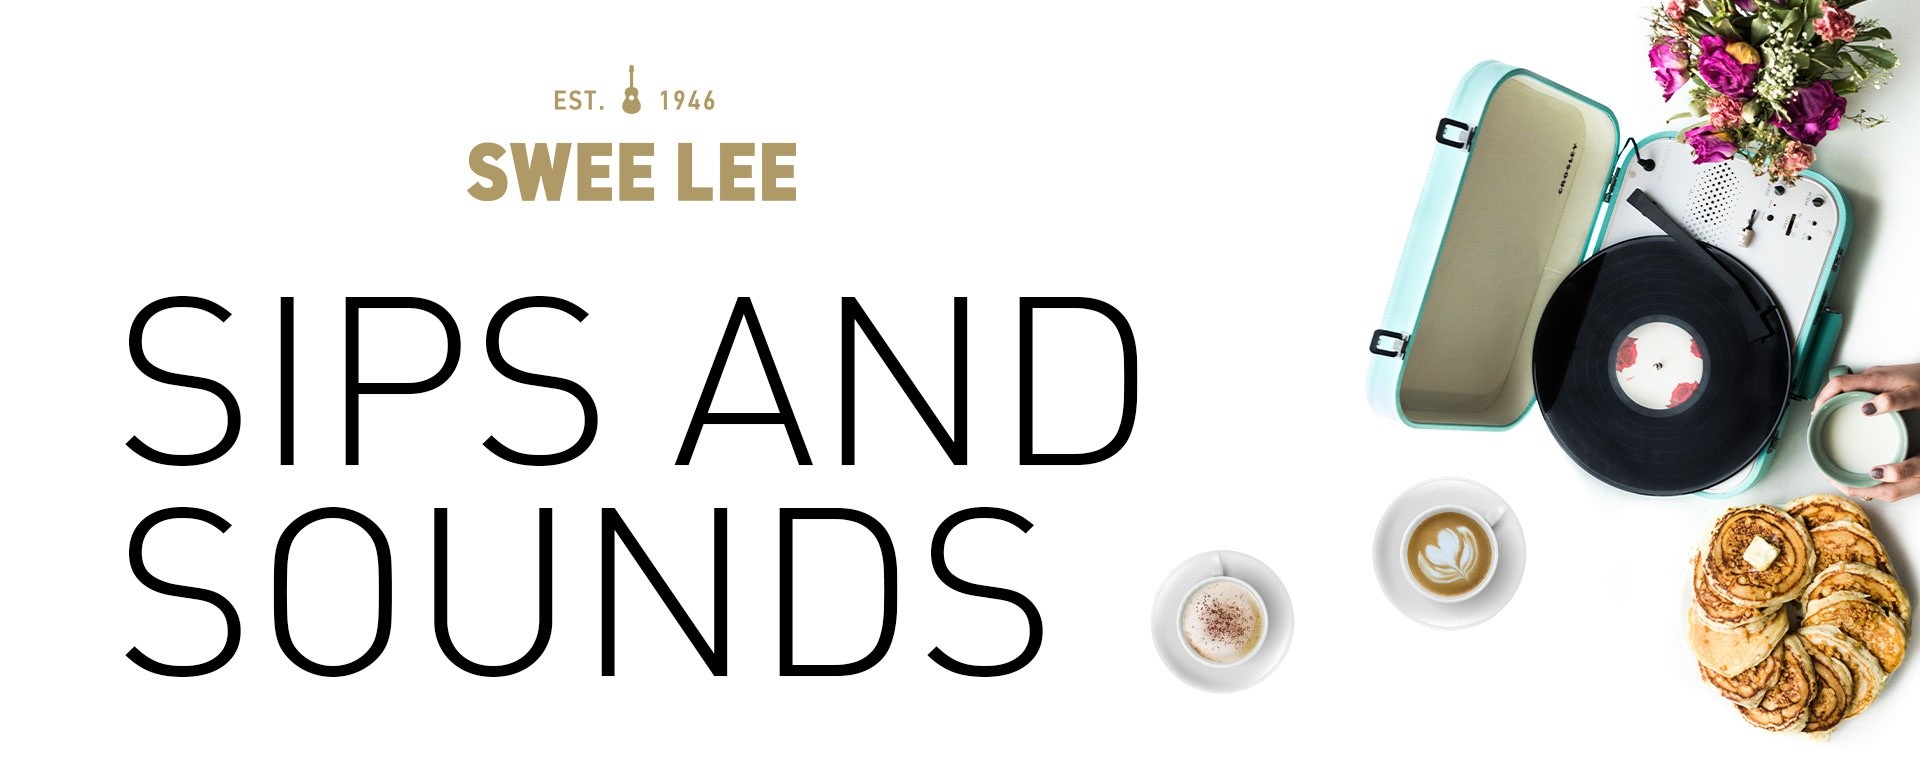 Sips and Sounds: Explore vinyl with Swee Lee Music